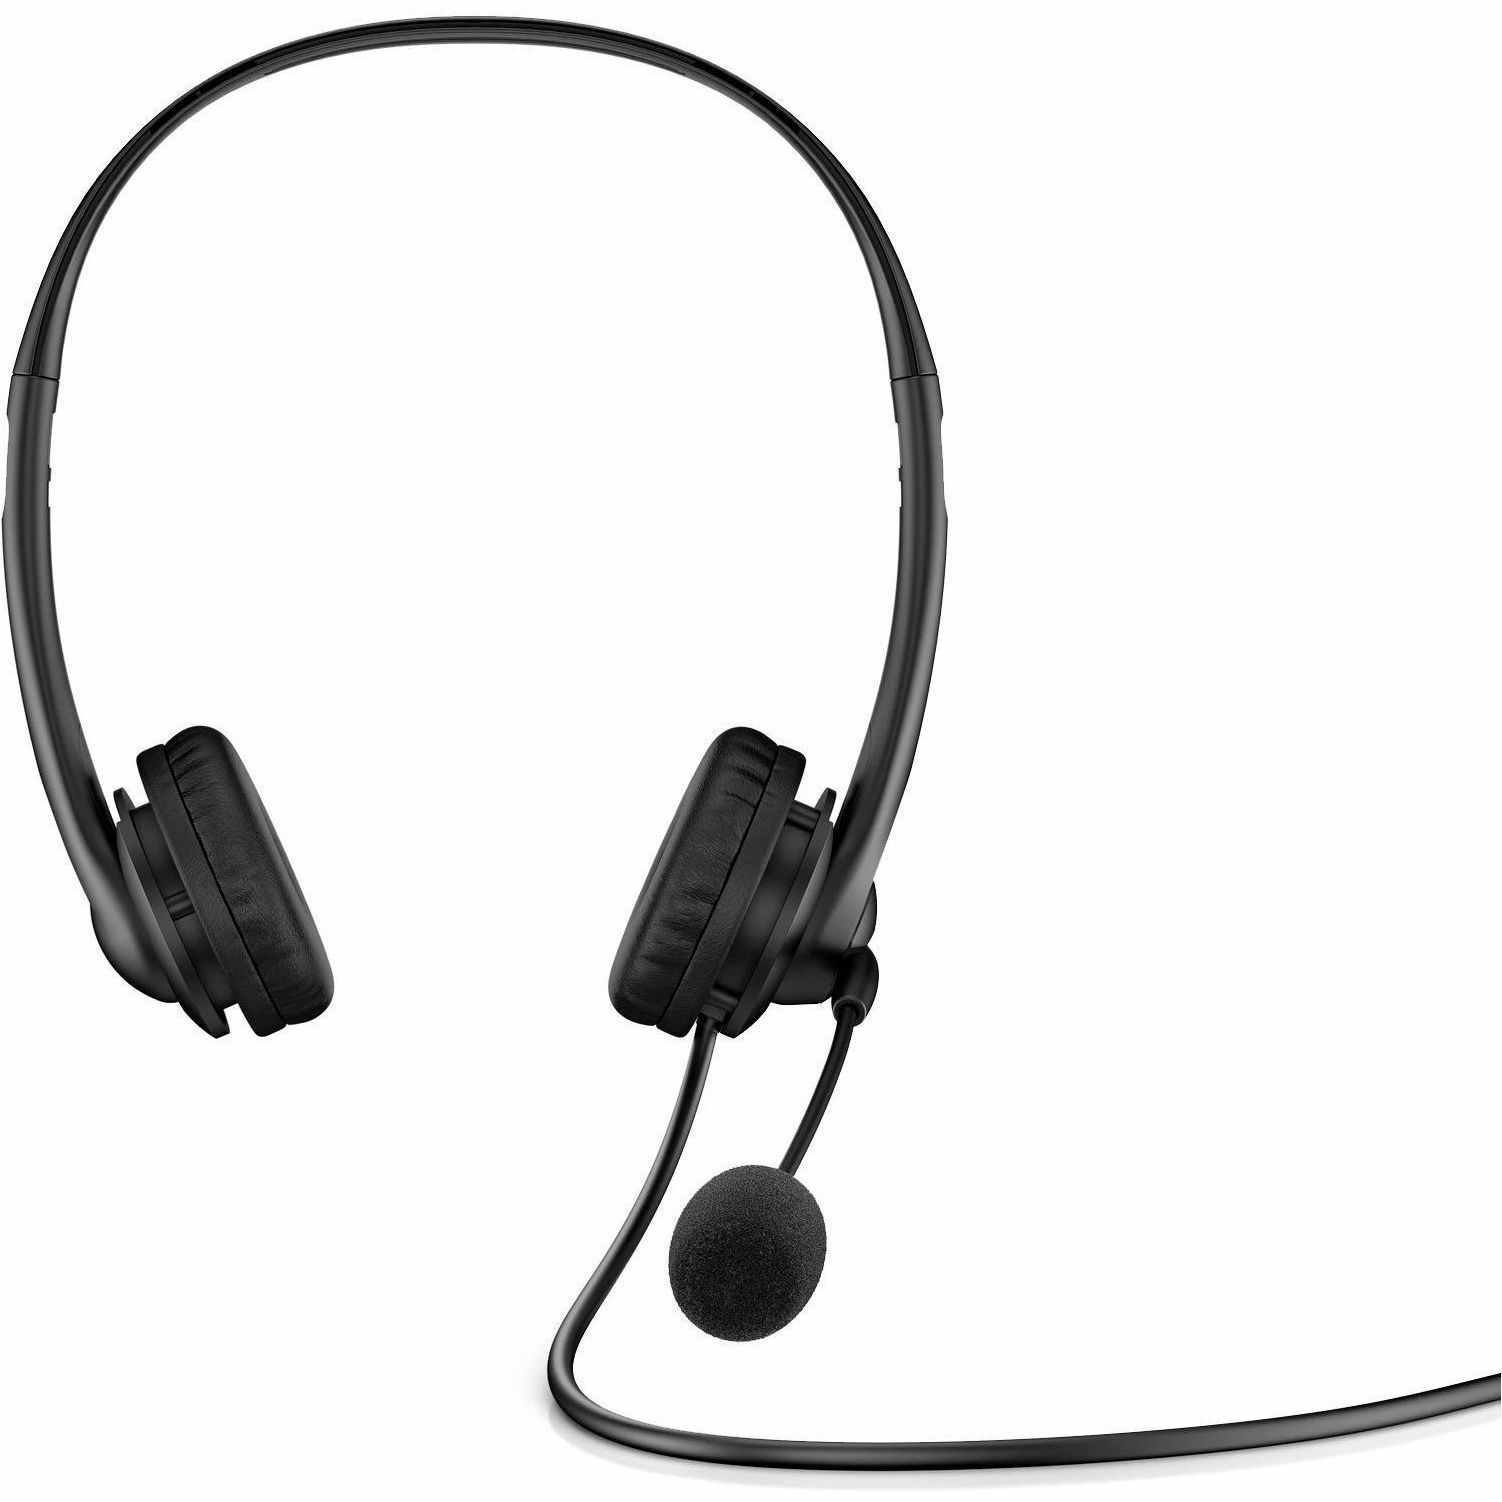 HP Stereo USB Headset G2 (428H5AA#ABL) - image 5 of 6